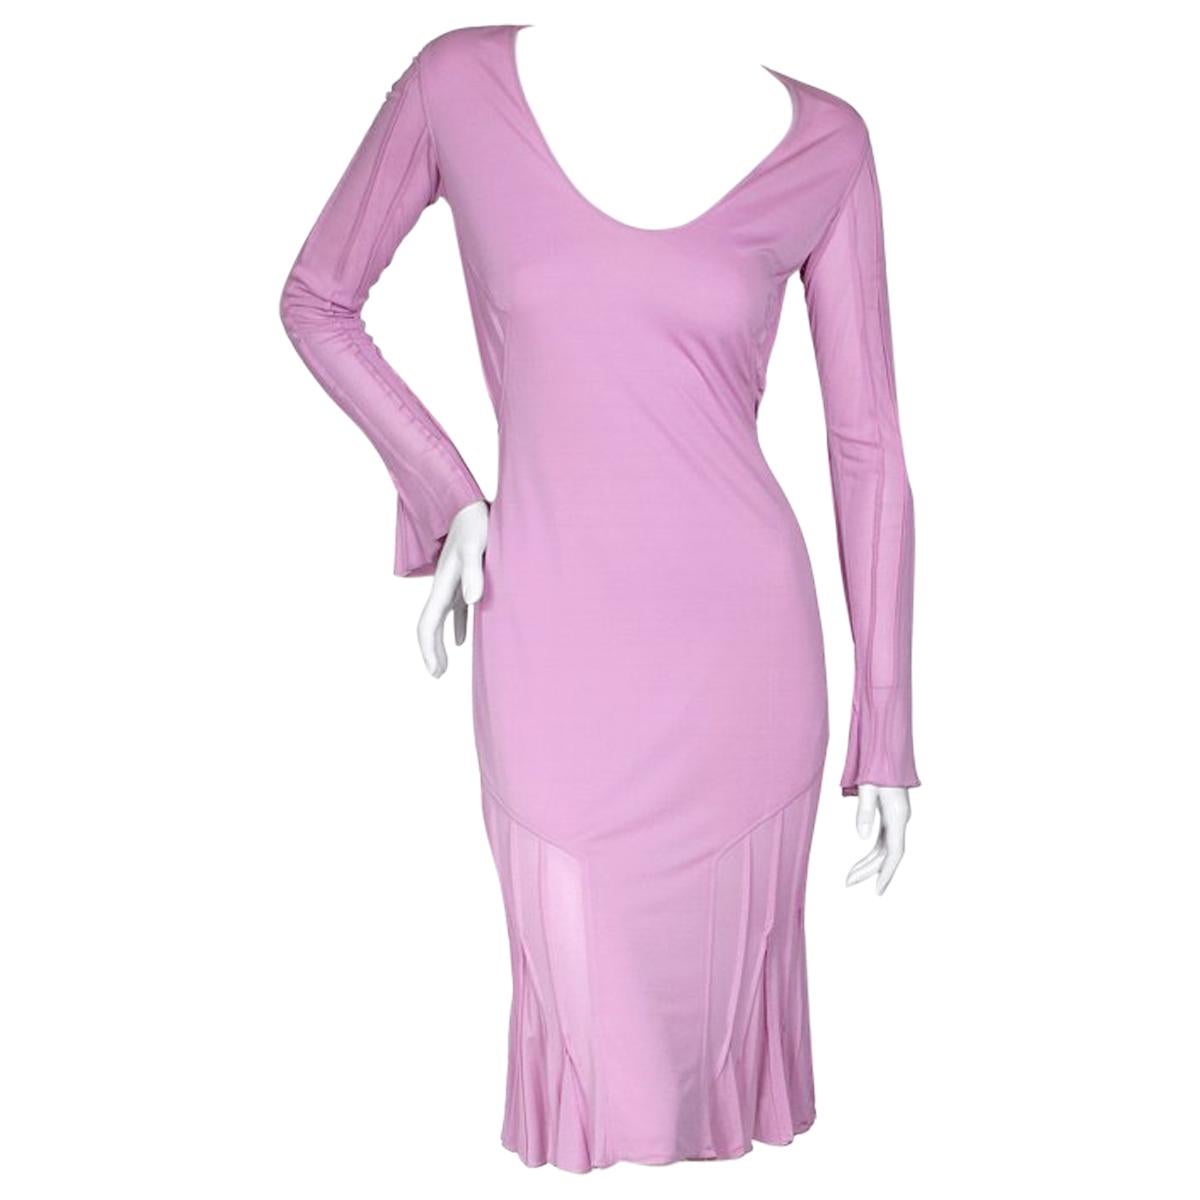 Long Sleeve Rose Pink Peasant Dress by Tom Ford, early 2000s